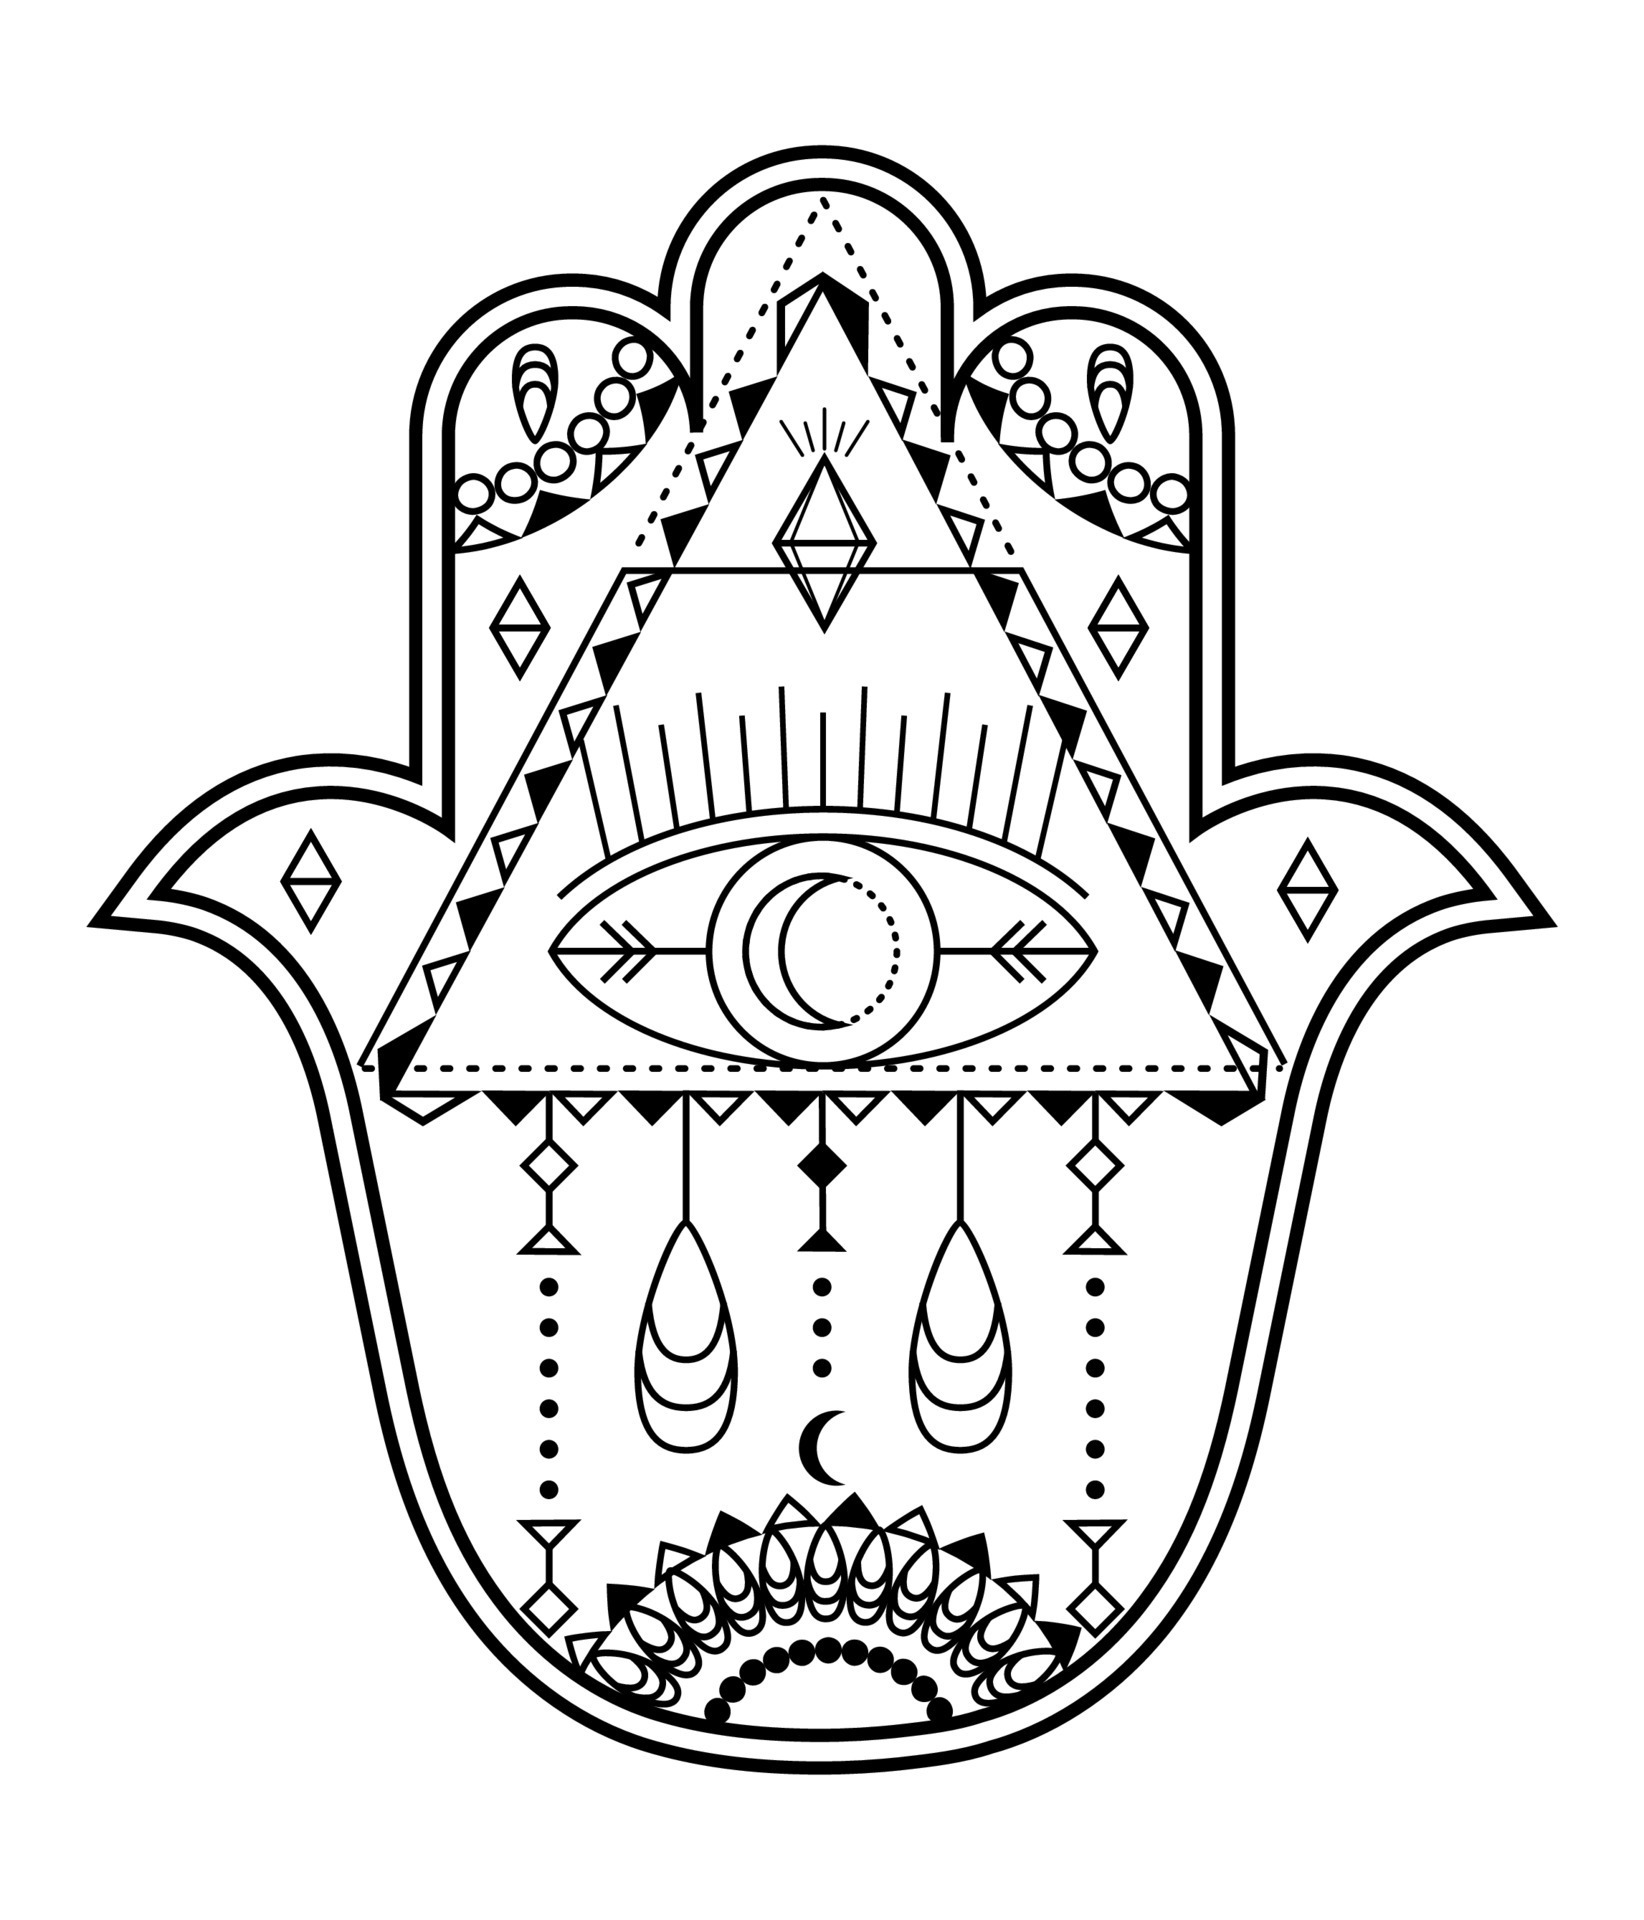 Buy PP TATTOO 1 Sheet Lotus Hamsa Hand Evil Eye Amulet Fashionable Henna  Temporary Tattoos Make up Neck Shoulder Upper arm Thigh Waterproof Stickers  for Men Women Sexy Body Art Online at